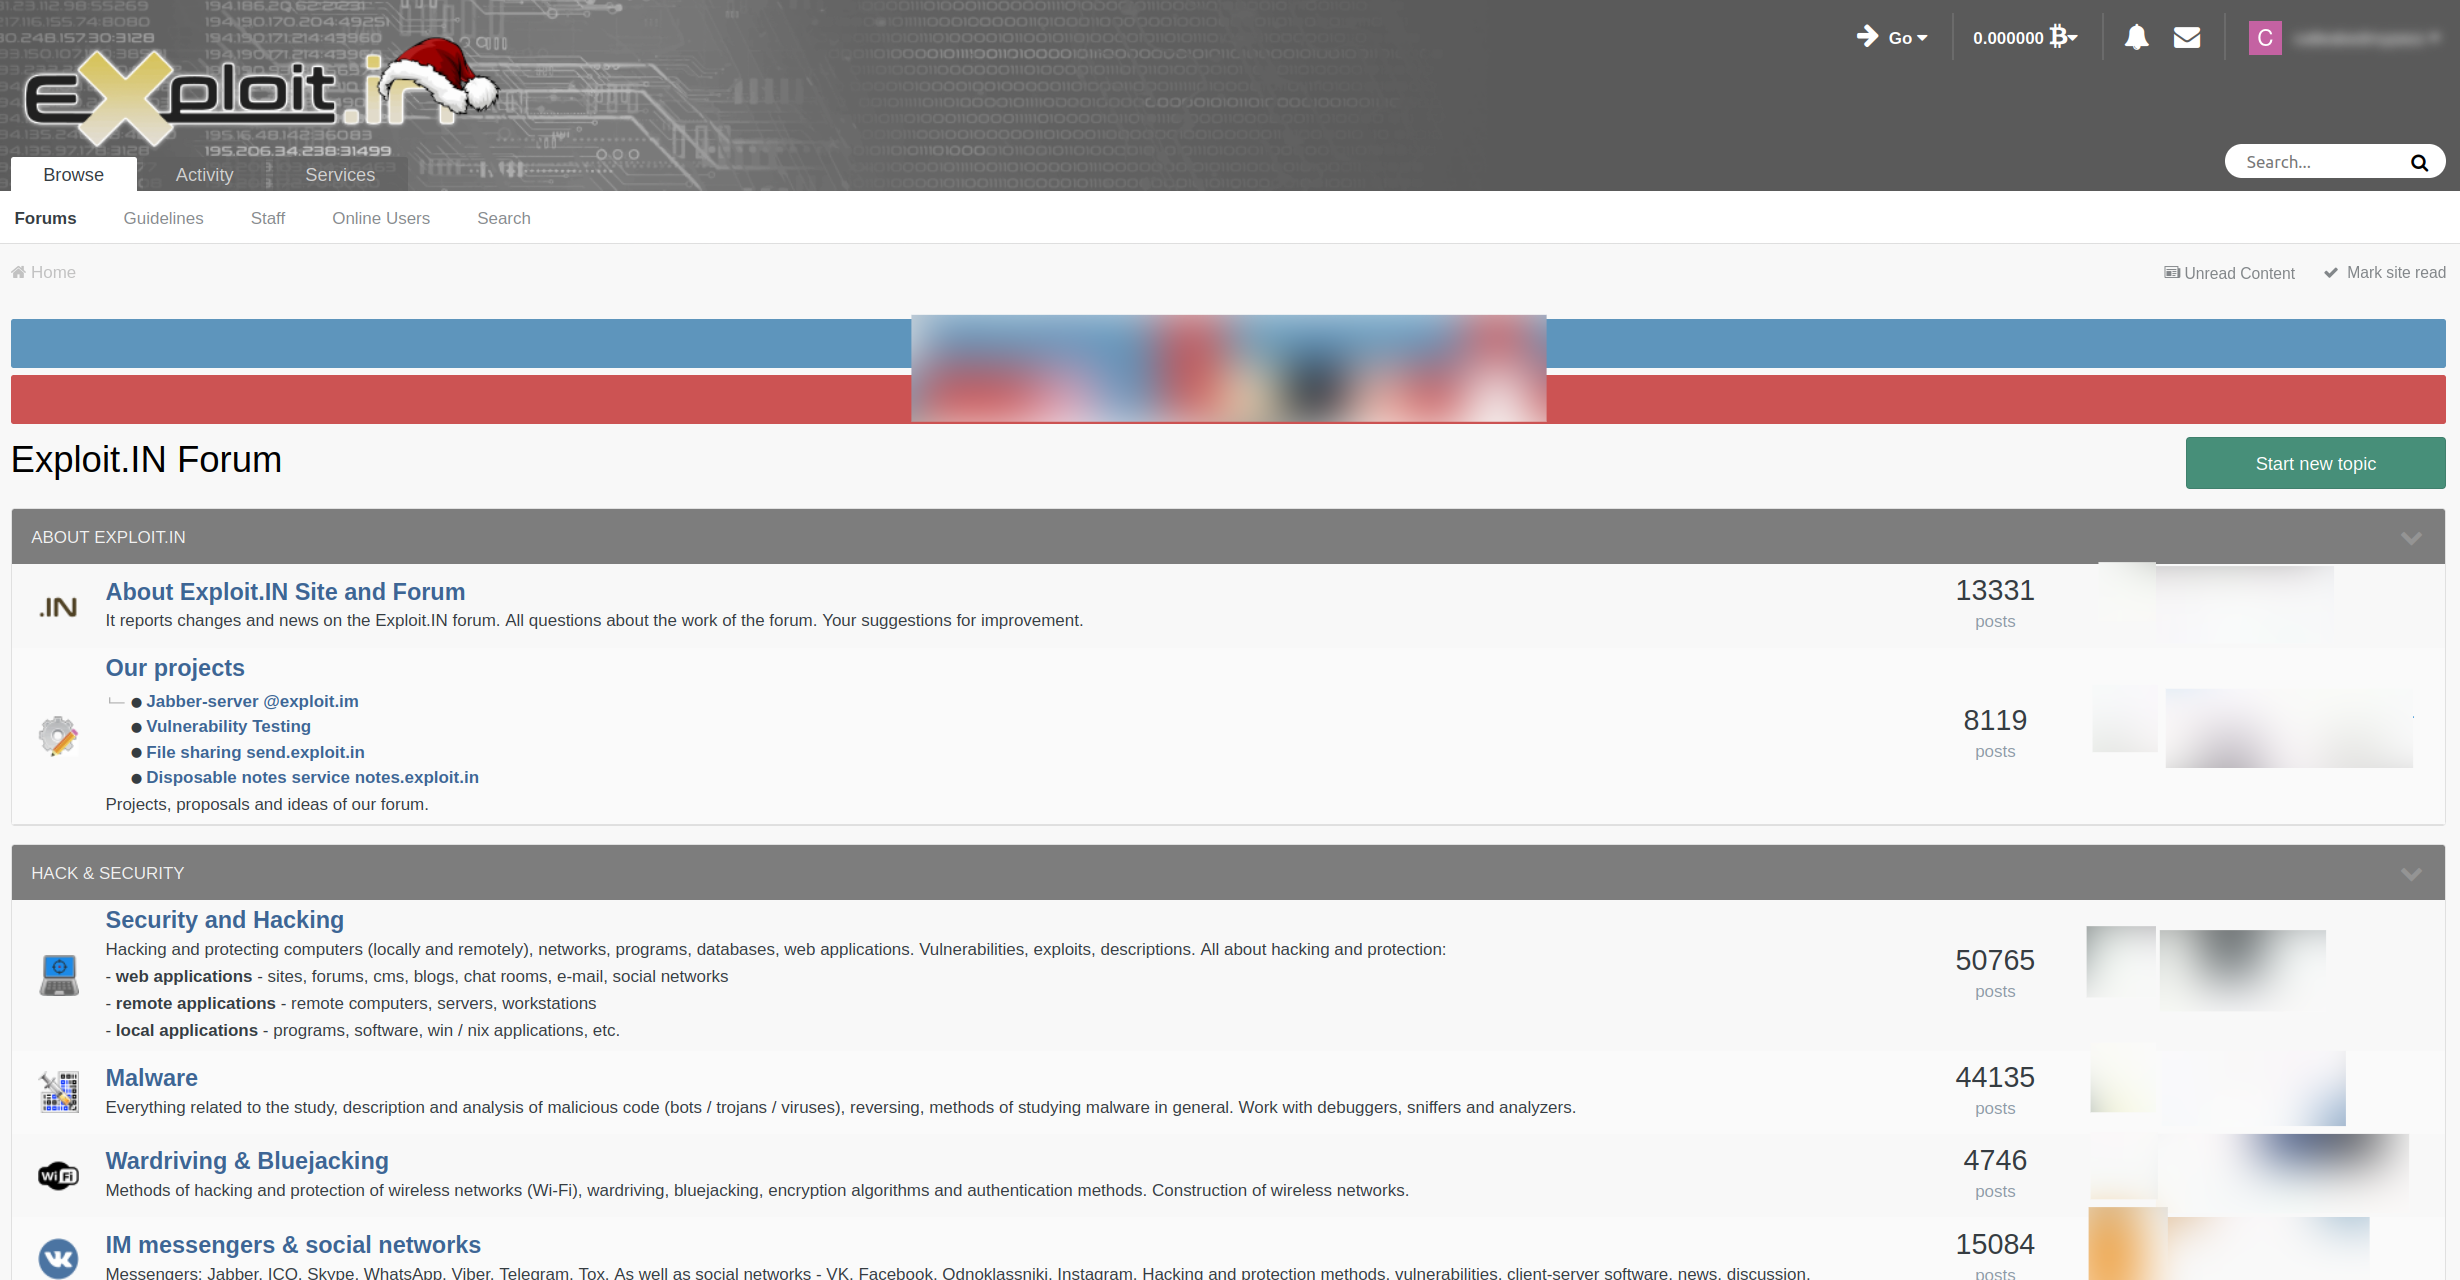 Screenshot of forum with the title “Exploit.in” in the top left. The rest of the webpage shares a description about the site and forum, various projects, and sections about posts about hacking. 